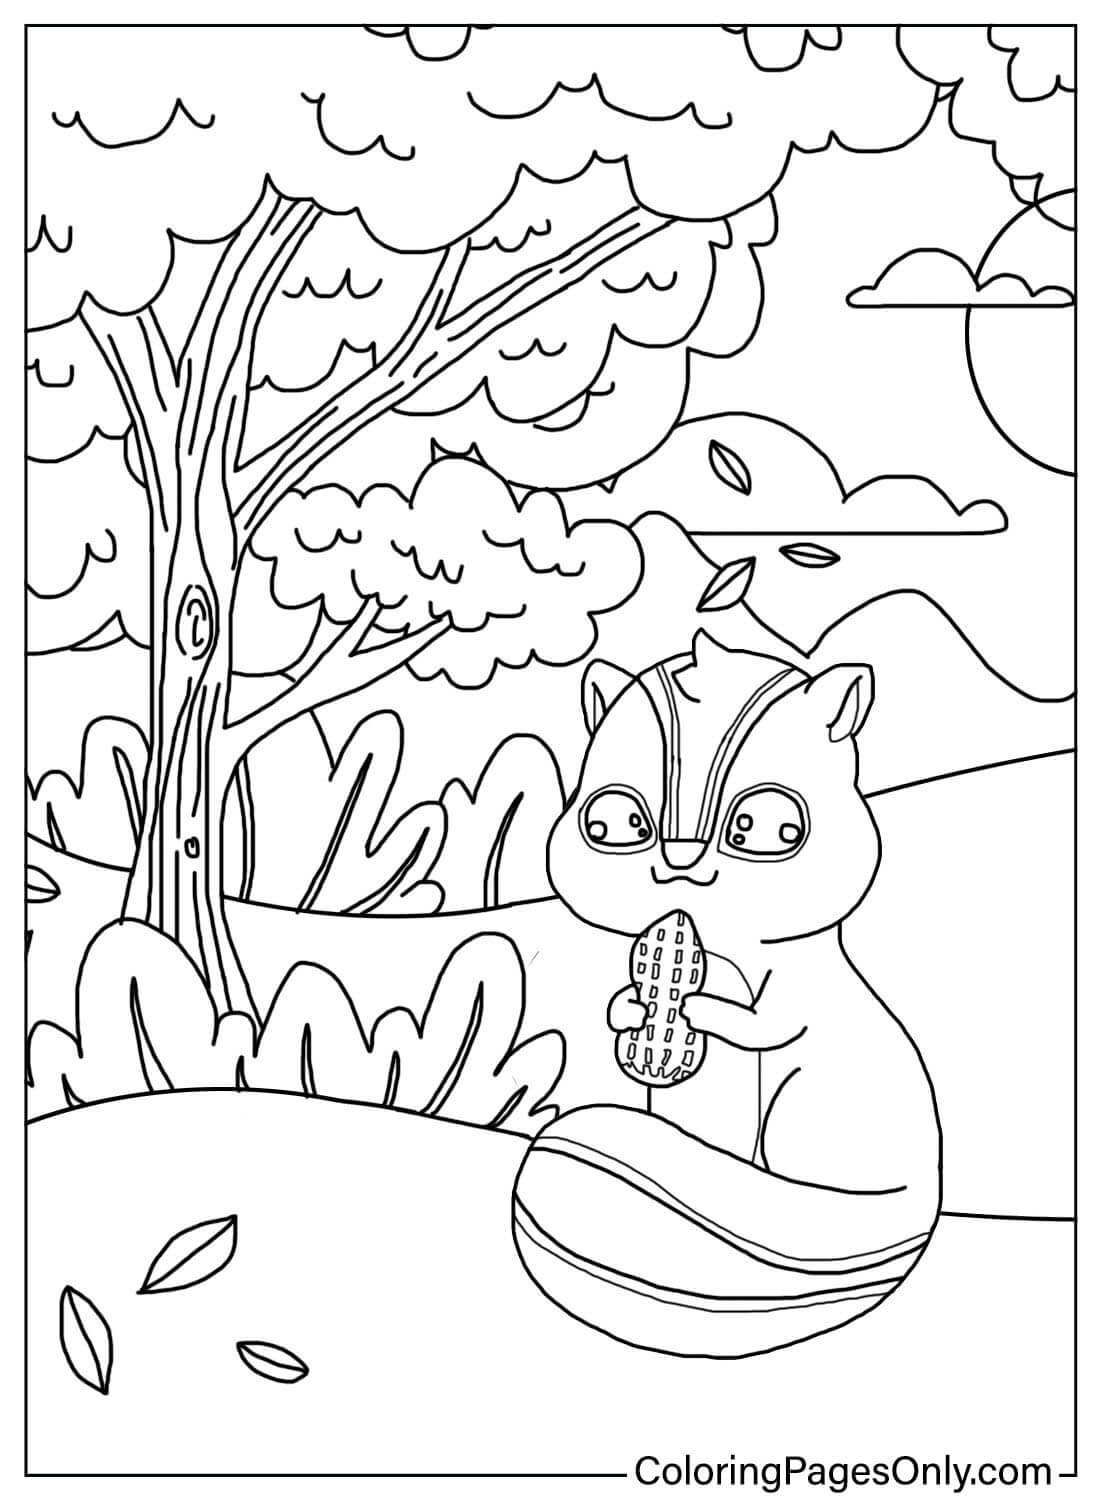 Chipmunk Coloring Page from Chipmunk